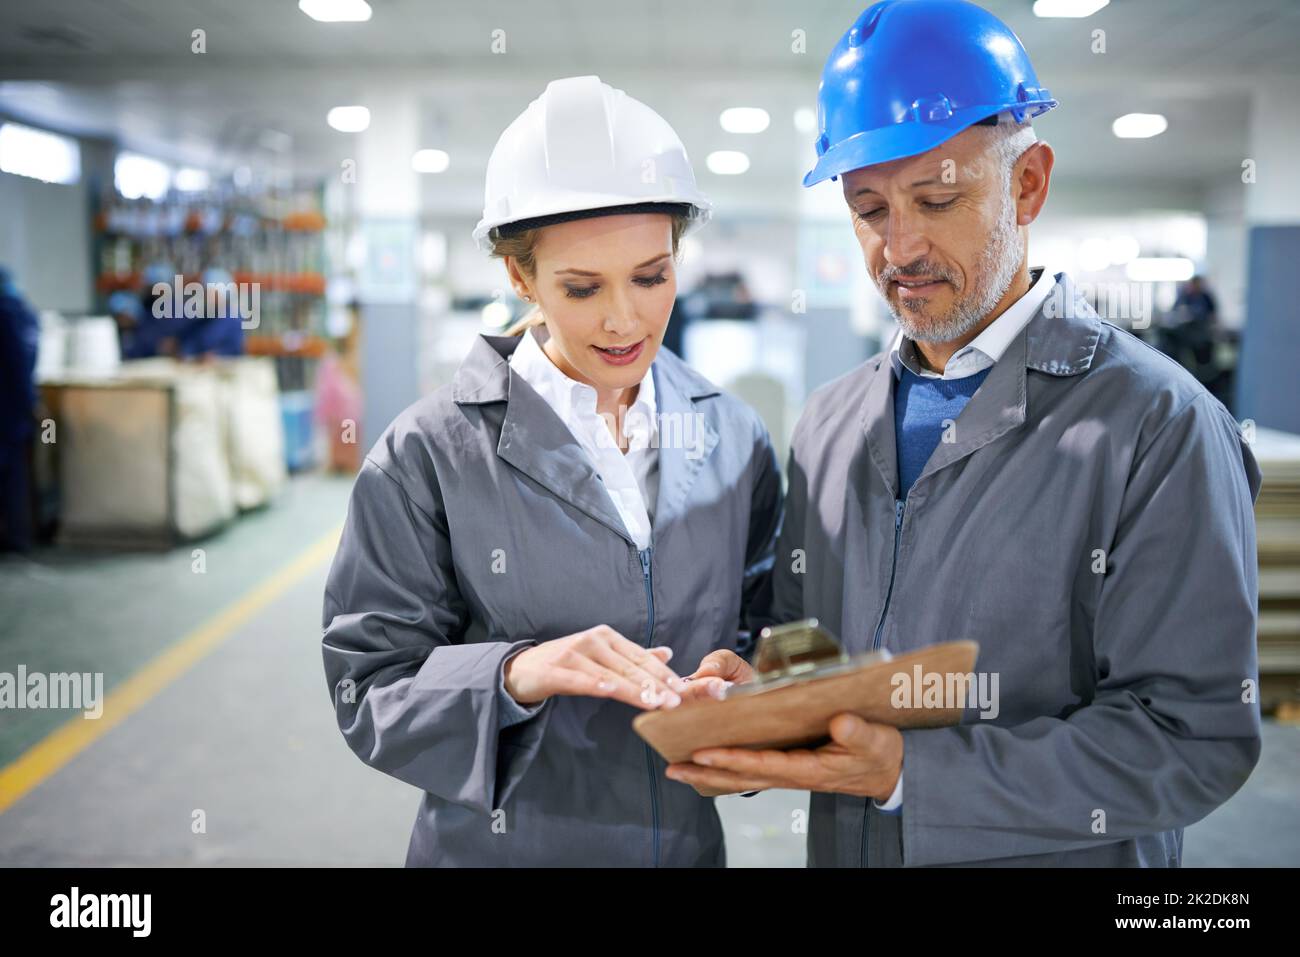 Give the order a once over. two managers standing inside a printing and packaging plant. Stock Photo